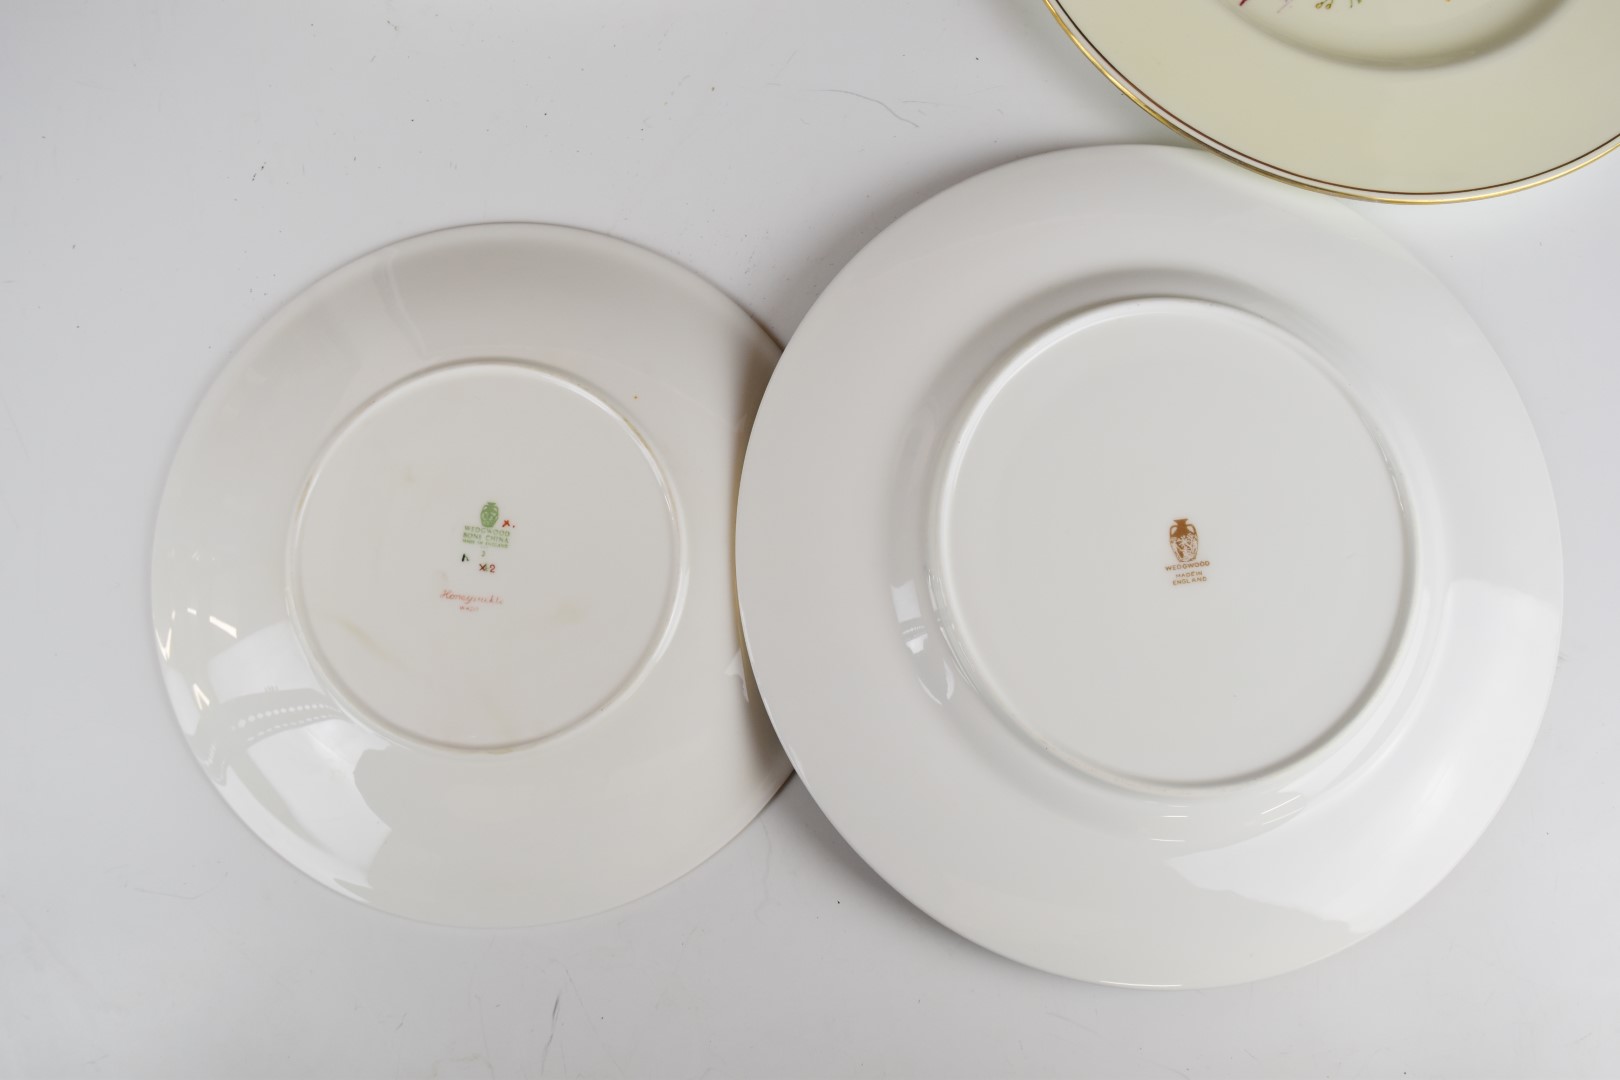 Wedgwood large charger, cabinet plates and Laurence Scarfe pin dish, largest diameter 41cm - Image 5 of 7